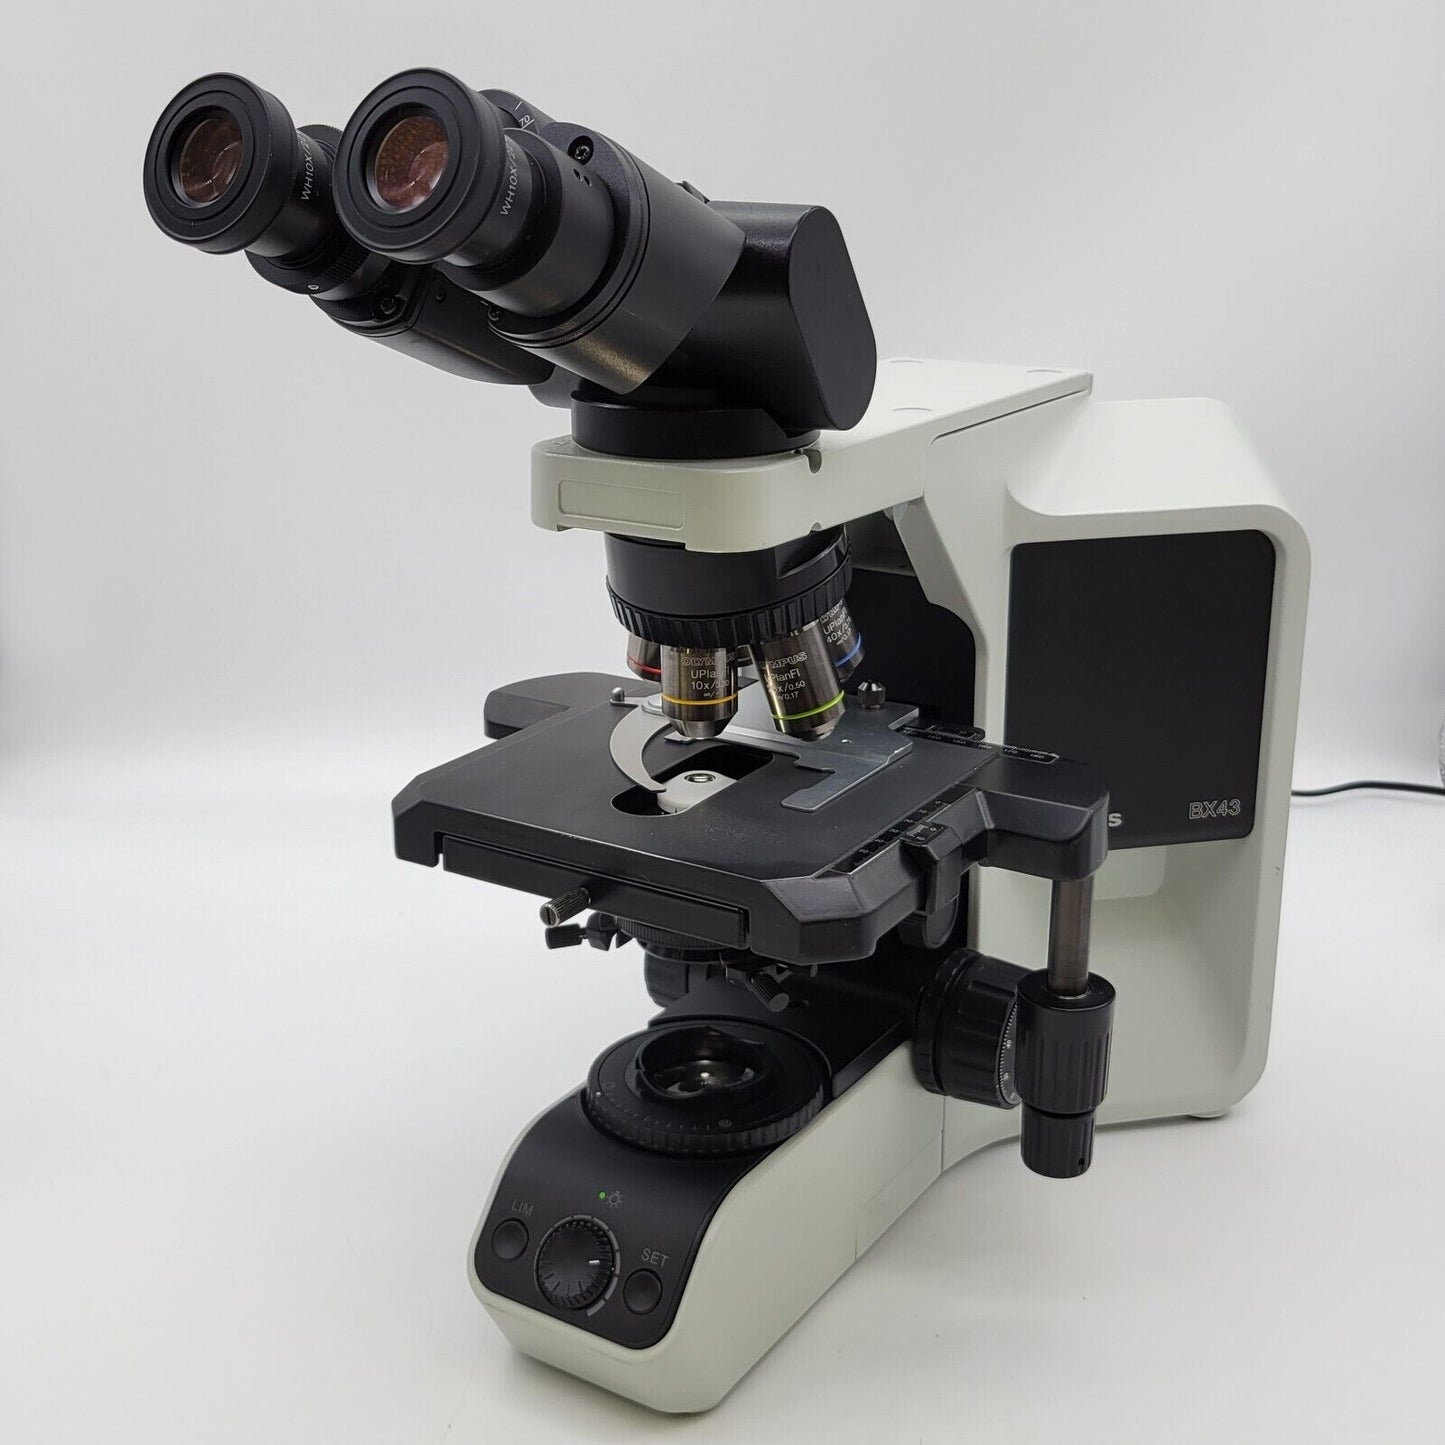 Olympus Microscope BX43 with Fluorites and Tilting Head for Pathology - microscopemarketplace